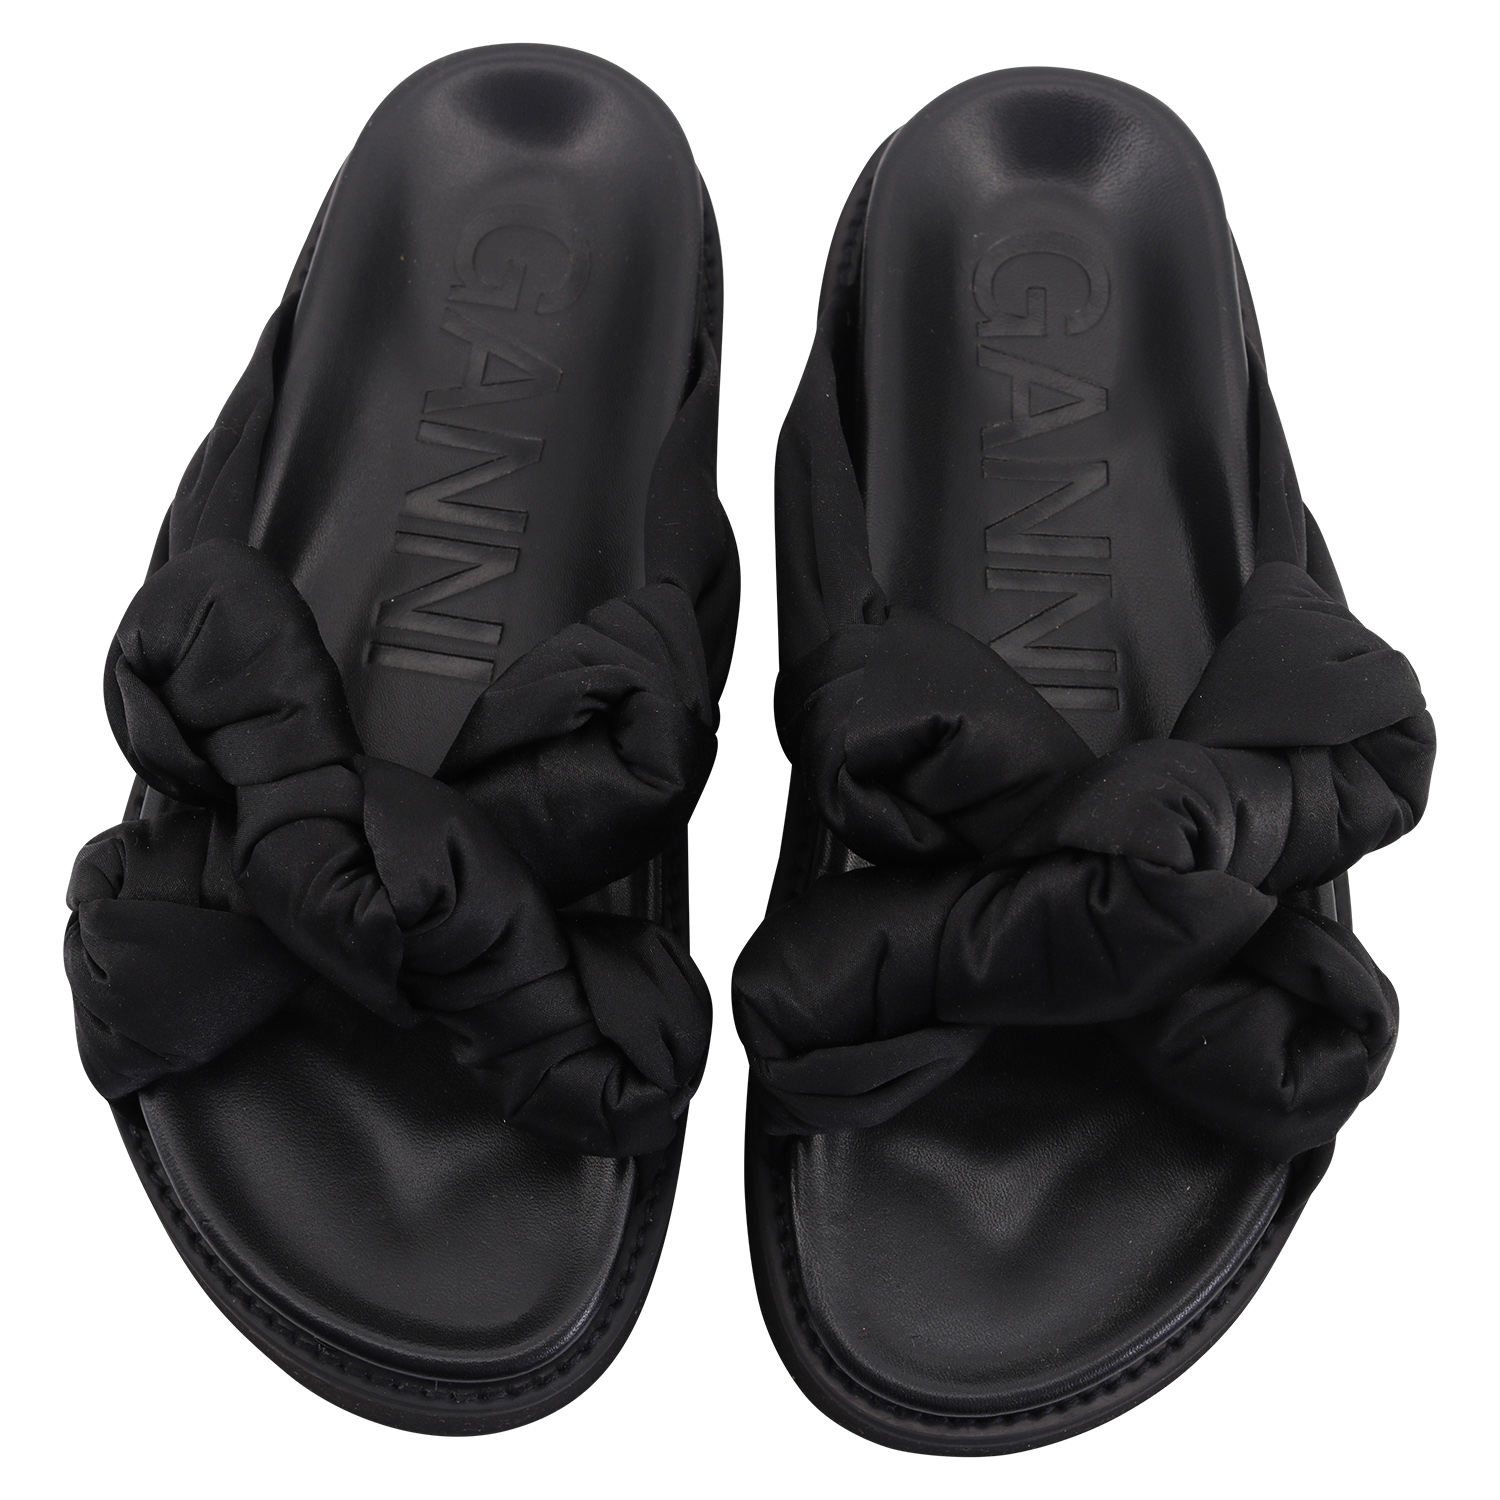 Ganni Mid Knotted Sandal Recycled Satin Black 40